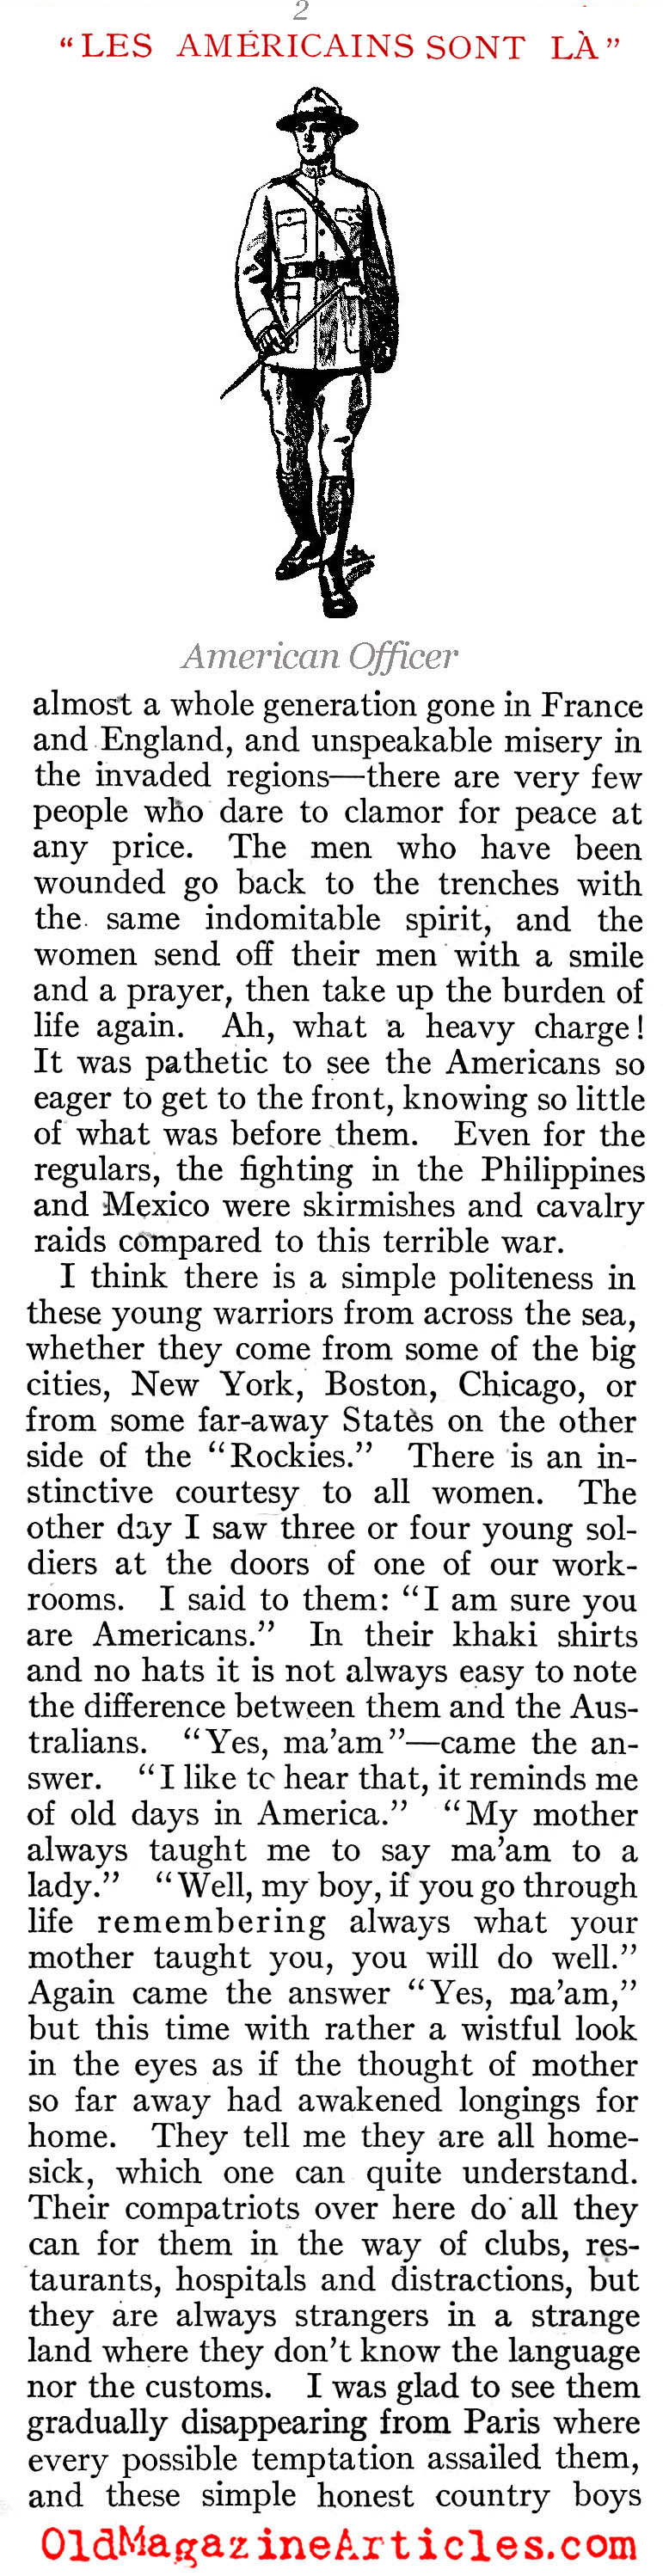 ''The Americans Are Here'' (Scribner's Magazine, 1919)